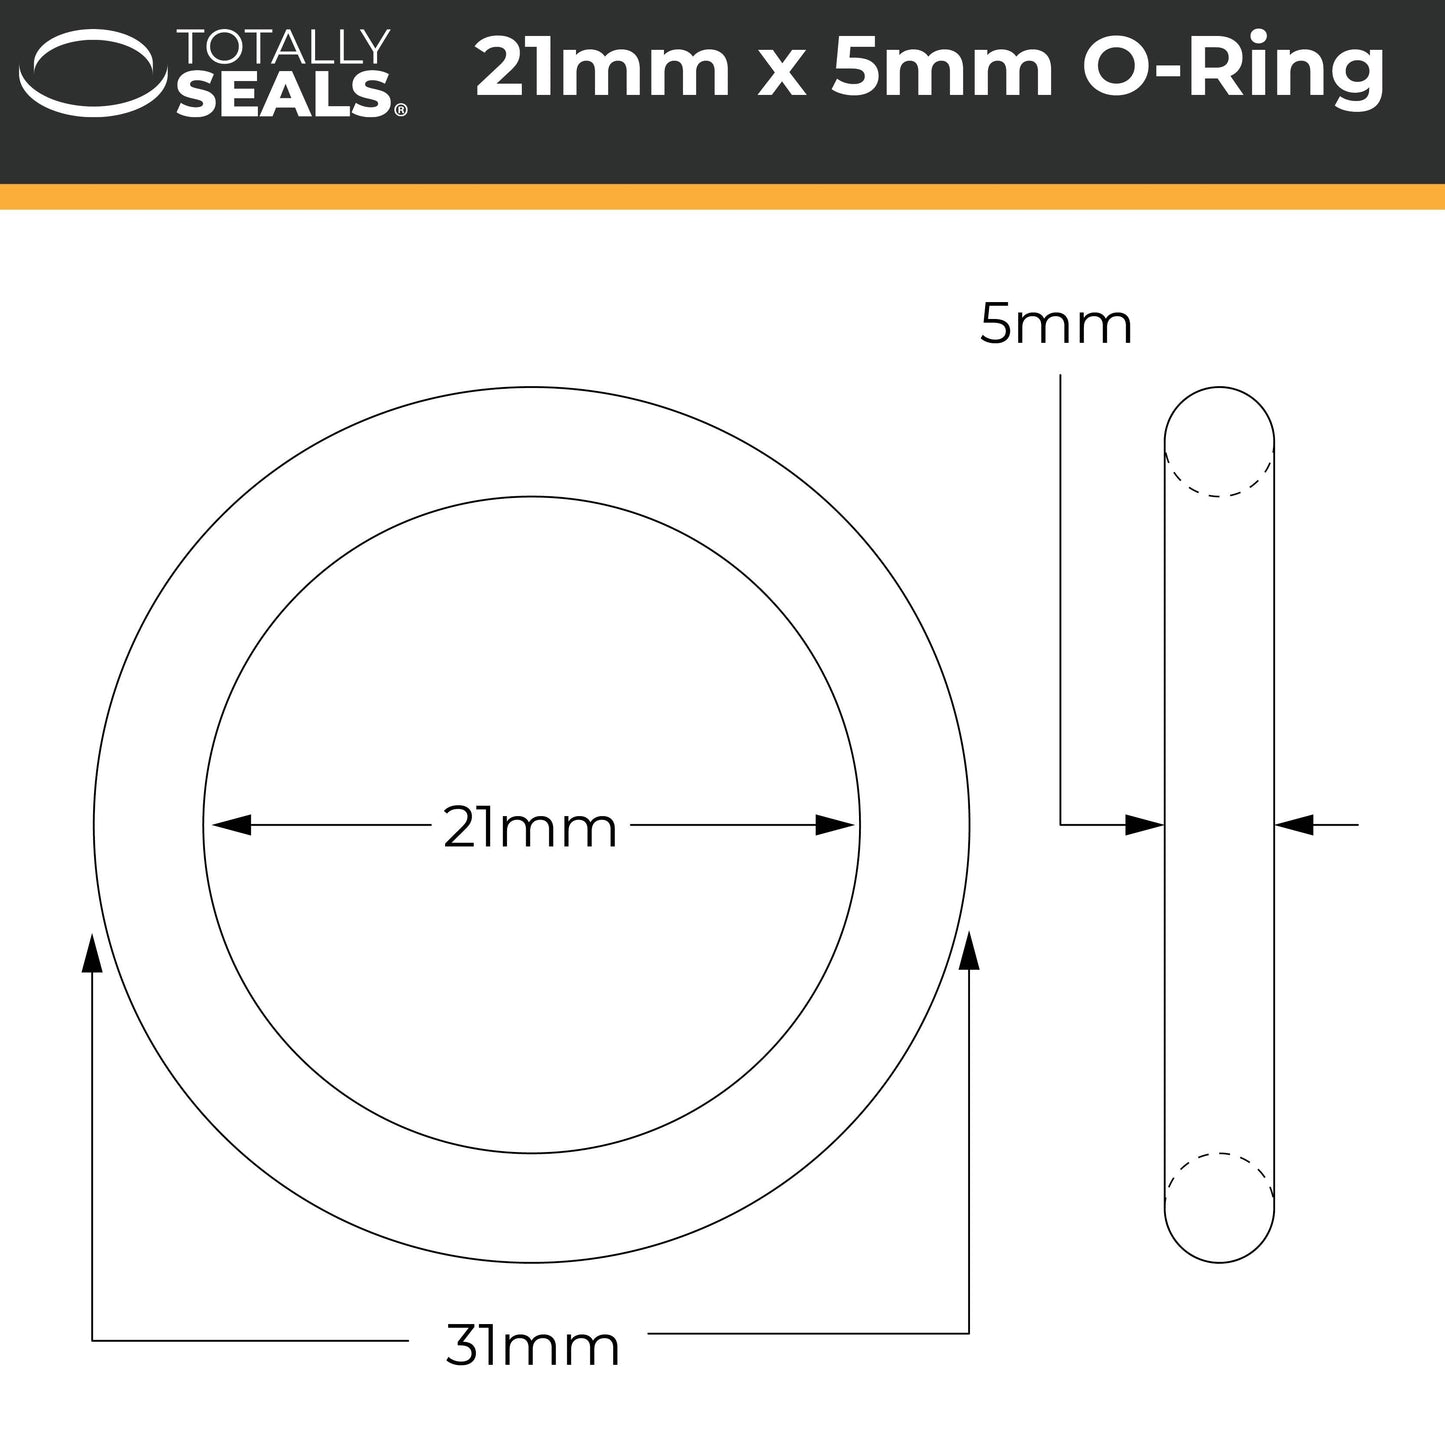 21mm x 5mm (31mm OD) Nitrile O-Rings - Totally Seals®